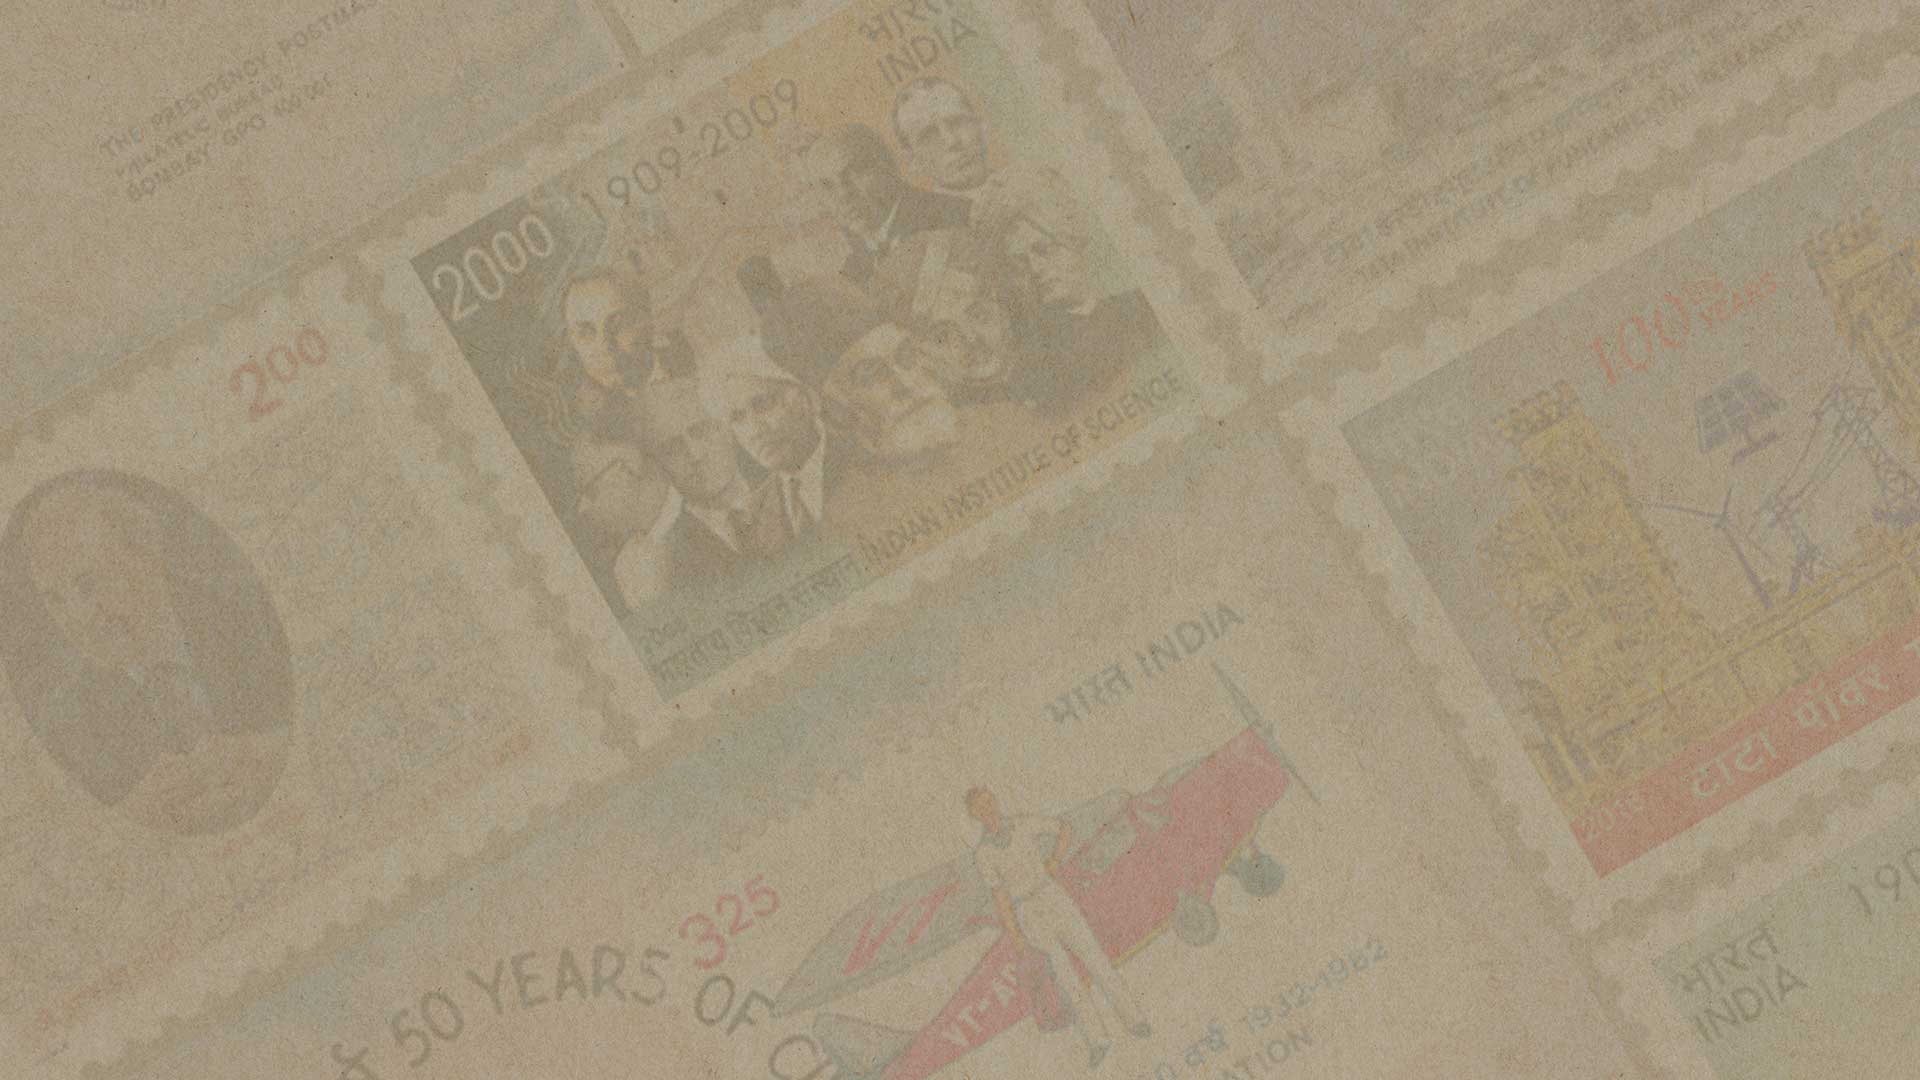 Stamps of the Tata group